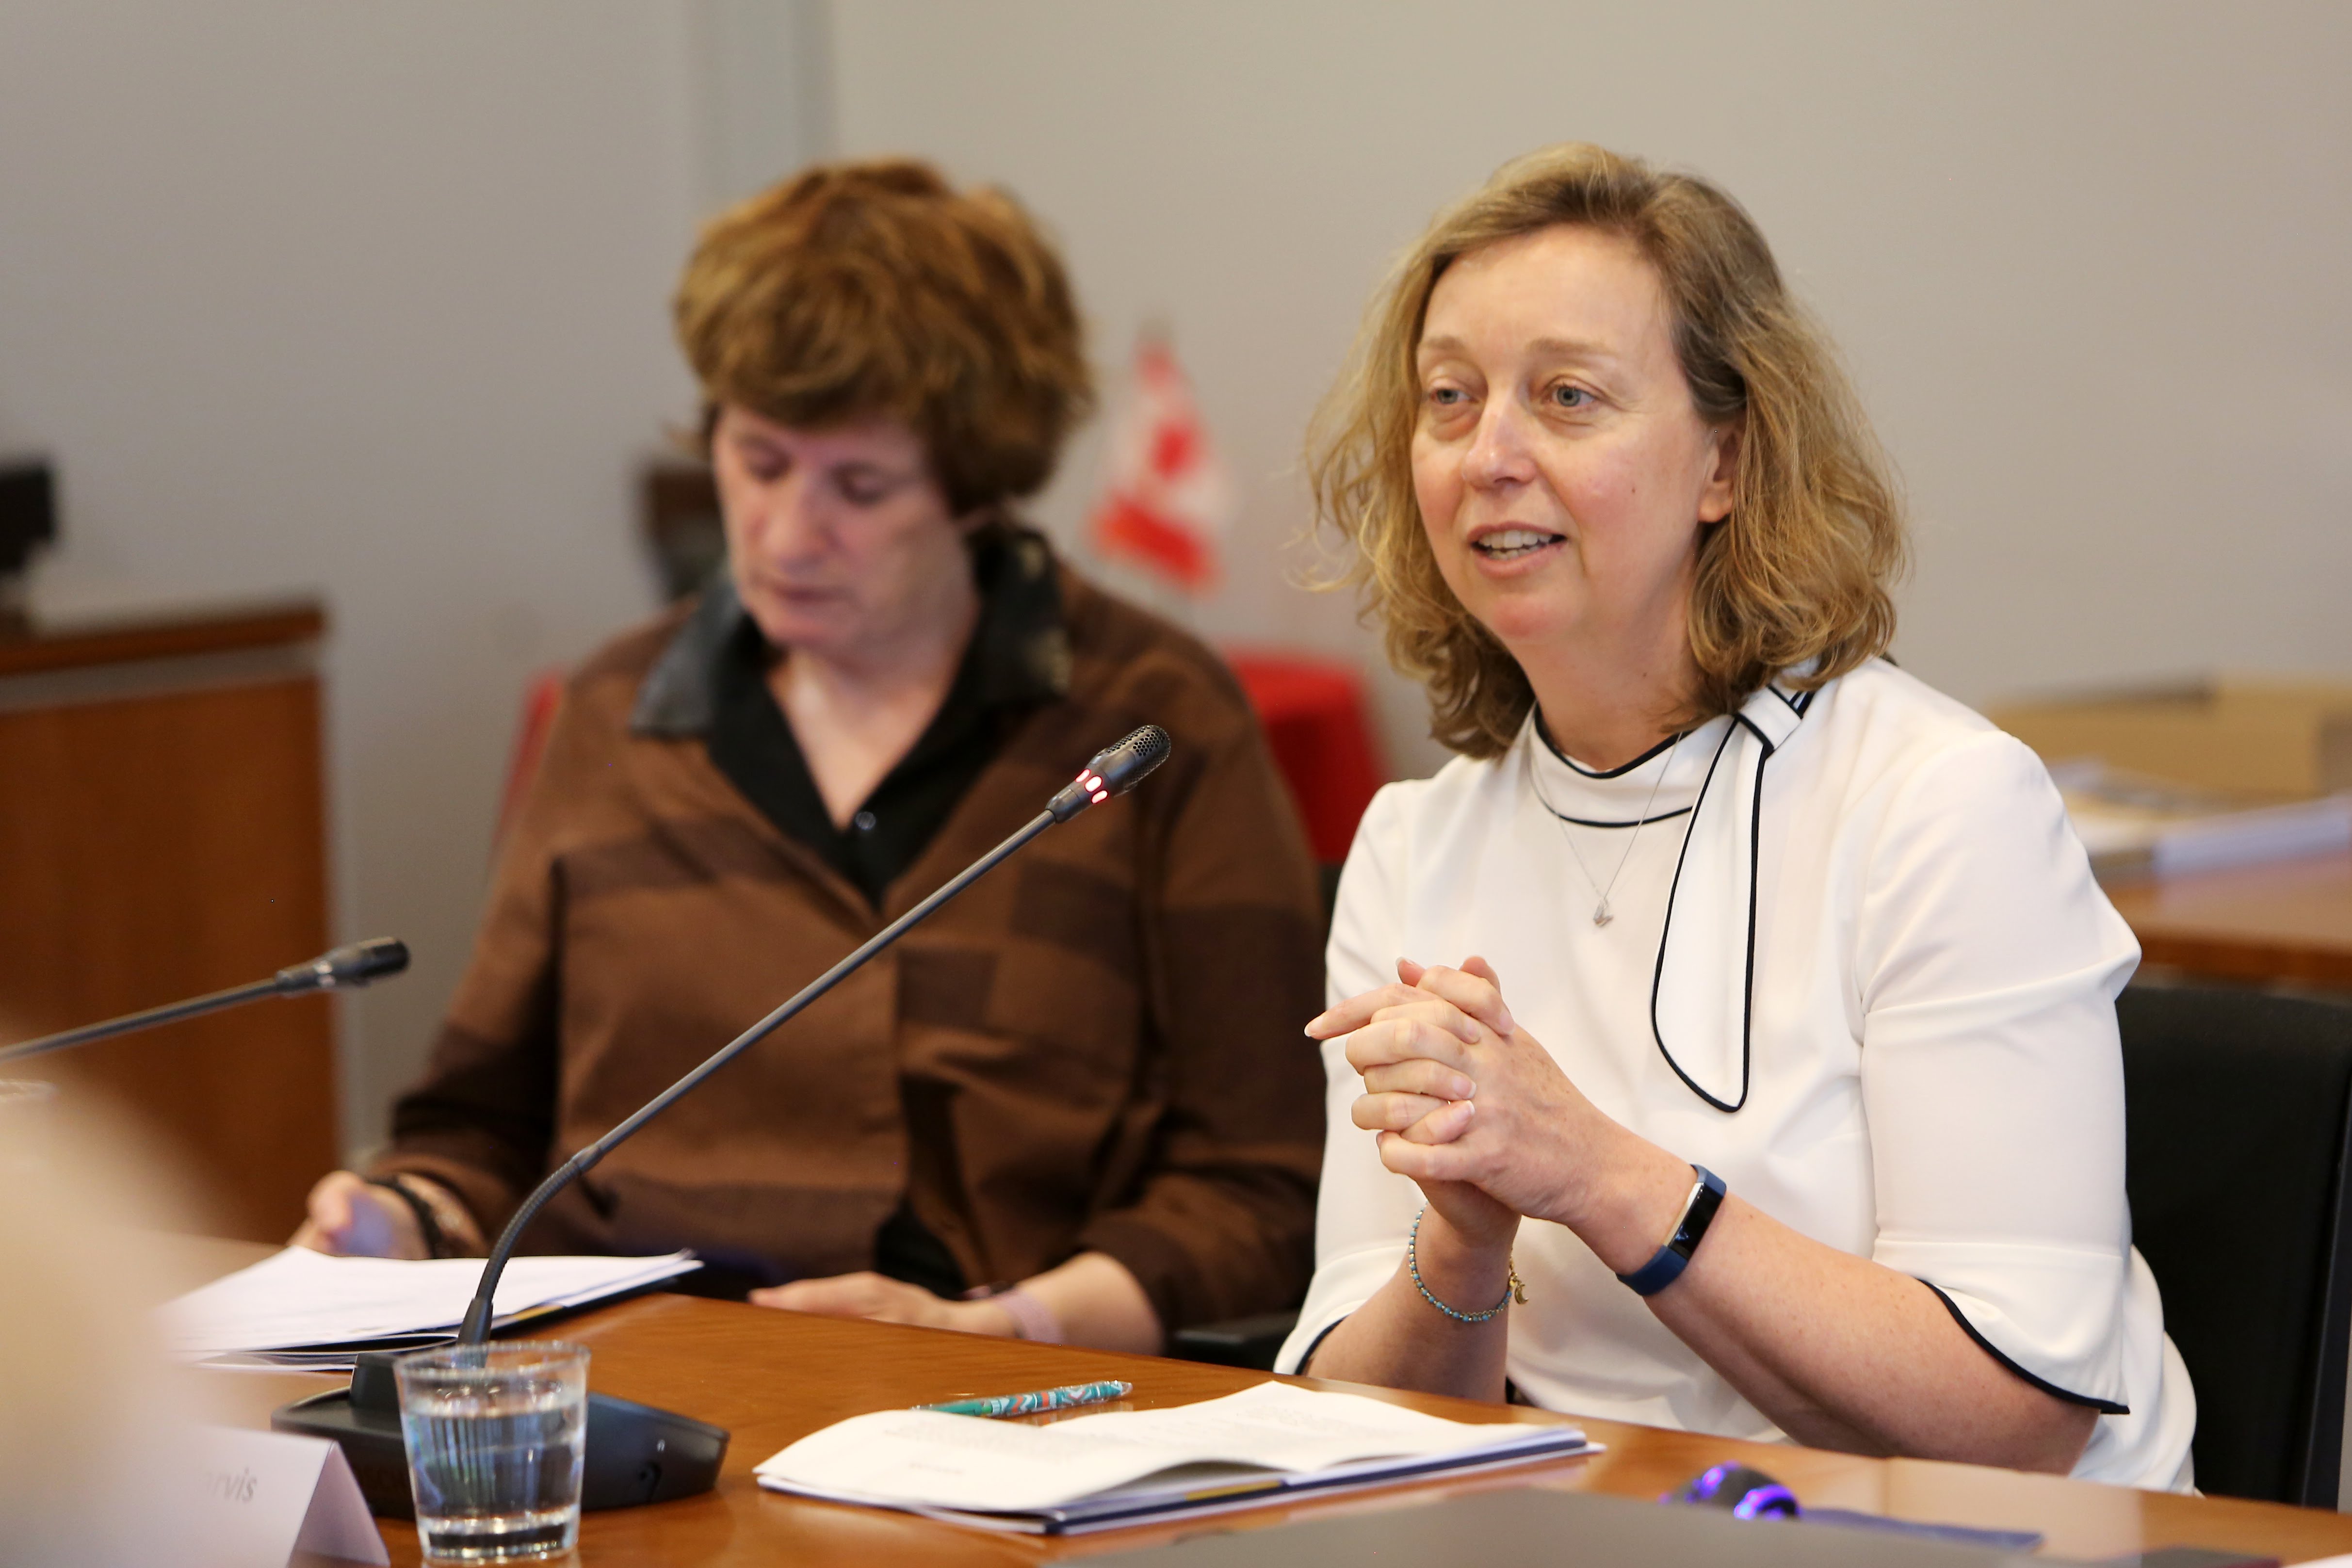 The Permanent Mission of Canada in Geneva hosted a panel discussion on 'Investigating Conflict Related Sexual and Gender-based Violence: The Case in Syria and Iraq' on 23 April 2018. Monday 23 April 2018 Photography: Malachy Harty Event contact: Valérie Sara Price, Justice Rapid Response, v.price@justicerapidresponse.org, +41 79 633 5641